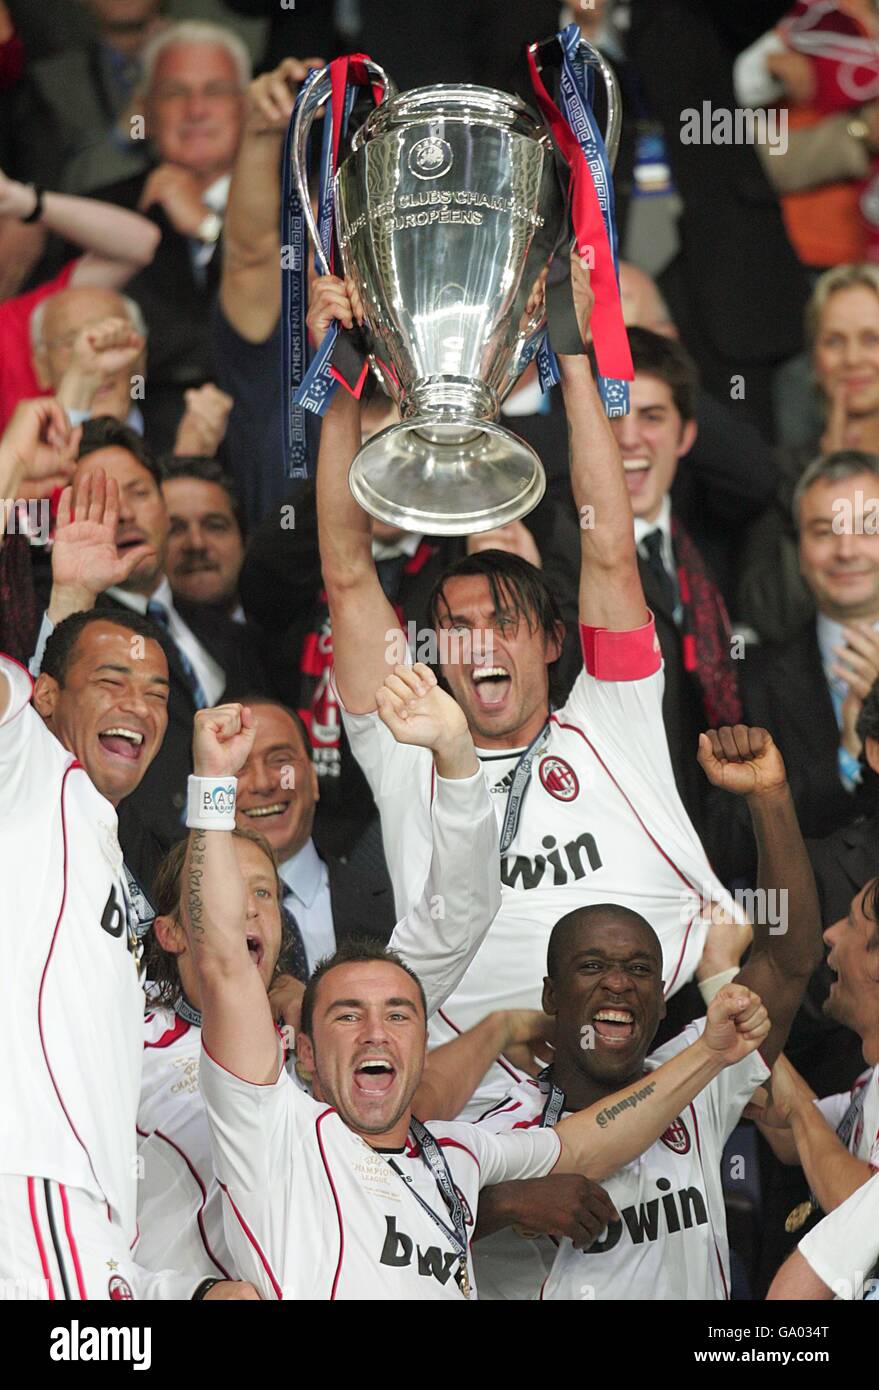 Soccer - UEFA Champions League - Final - AC Milan v Liverpool - Olympic Stadium. AC Milan's Paolo Maldini (centre) lifts the trophy as his side celebrate victory. Stock Photo